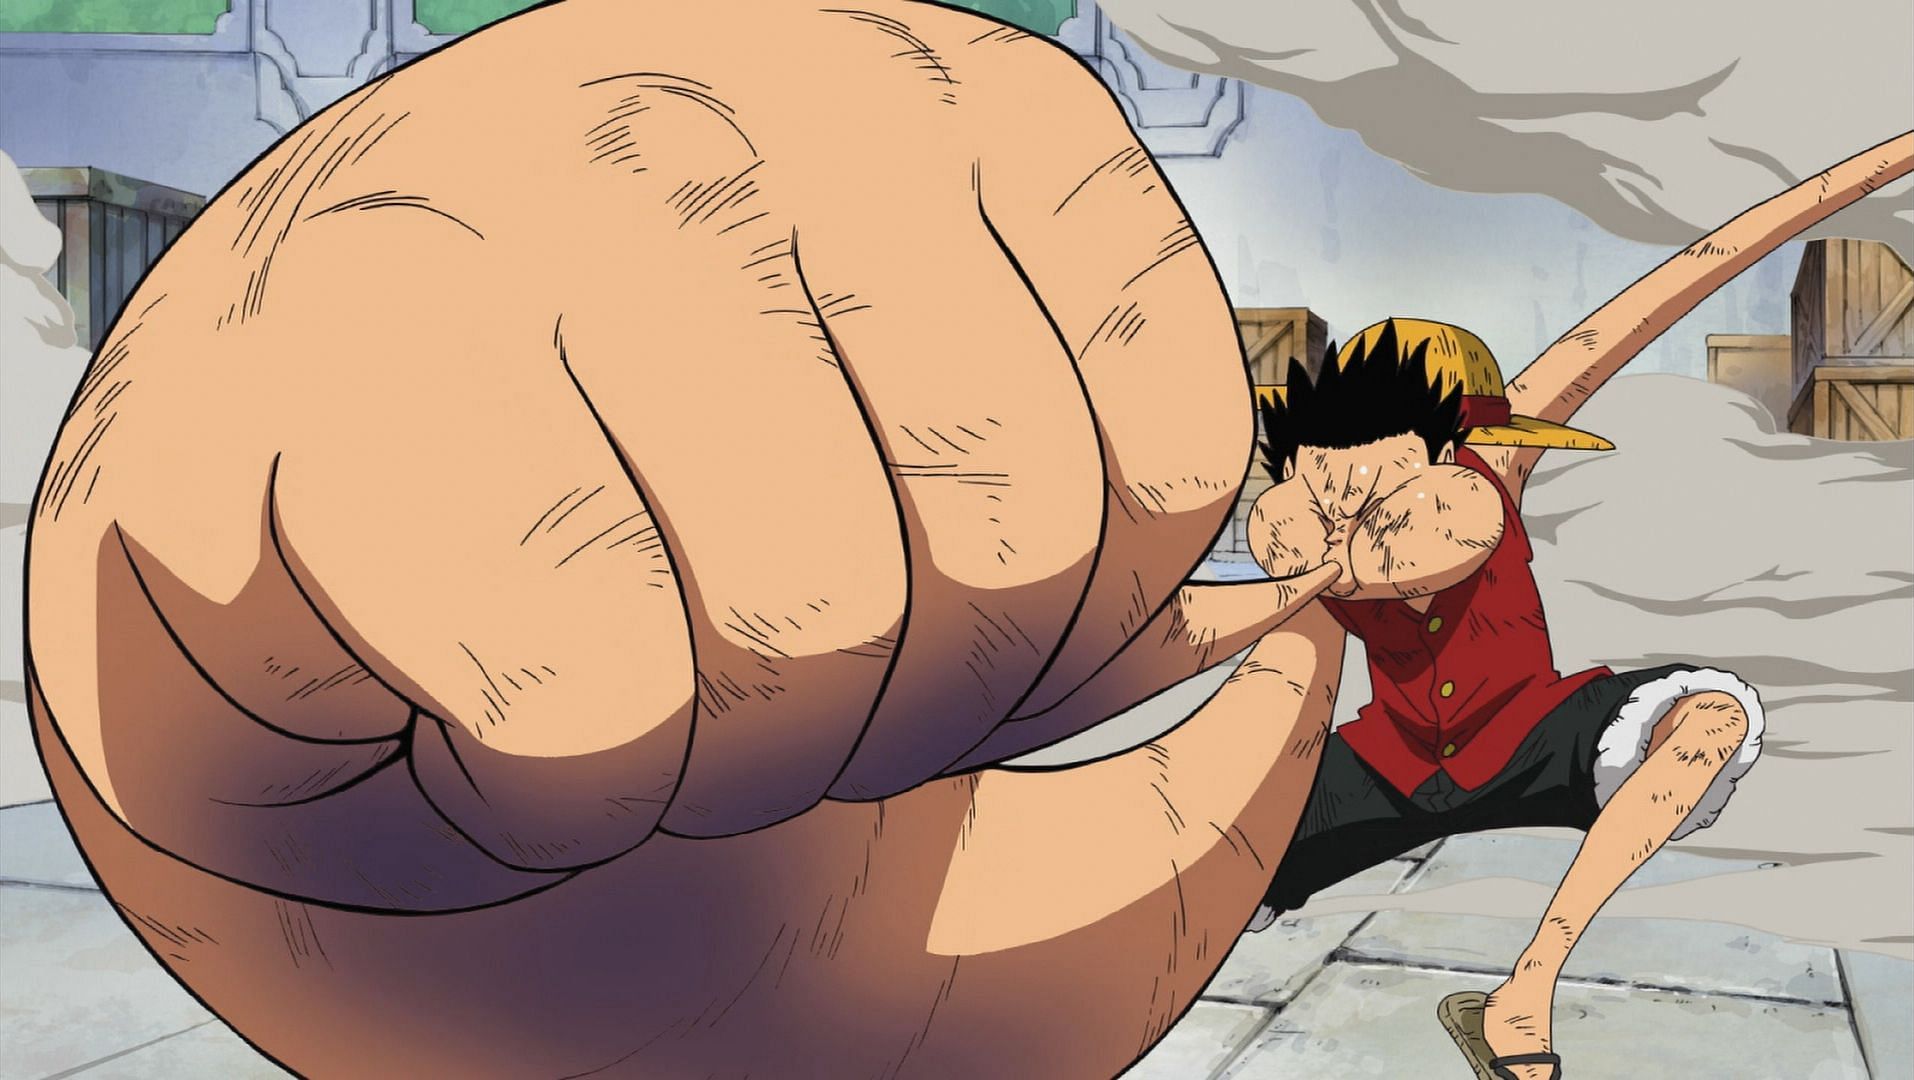 Luffy preparing to use Gear Third in the One Piece anime (Image via Toei Animation)